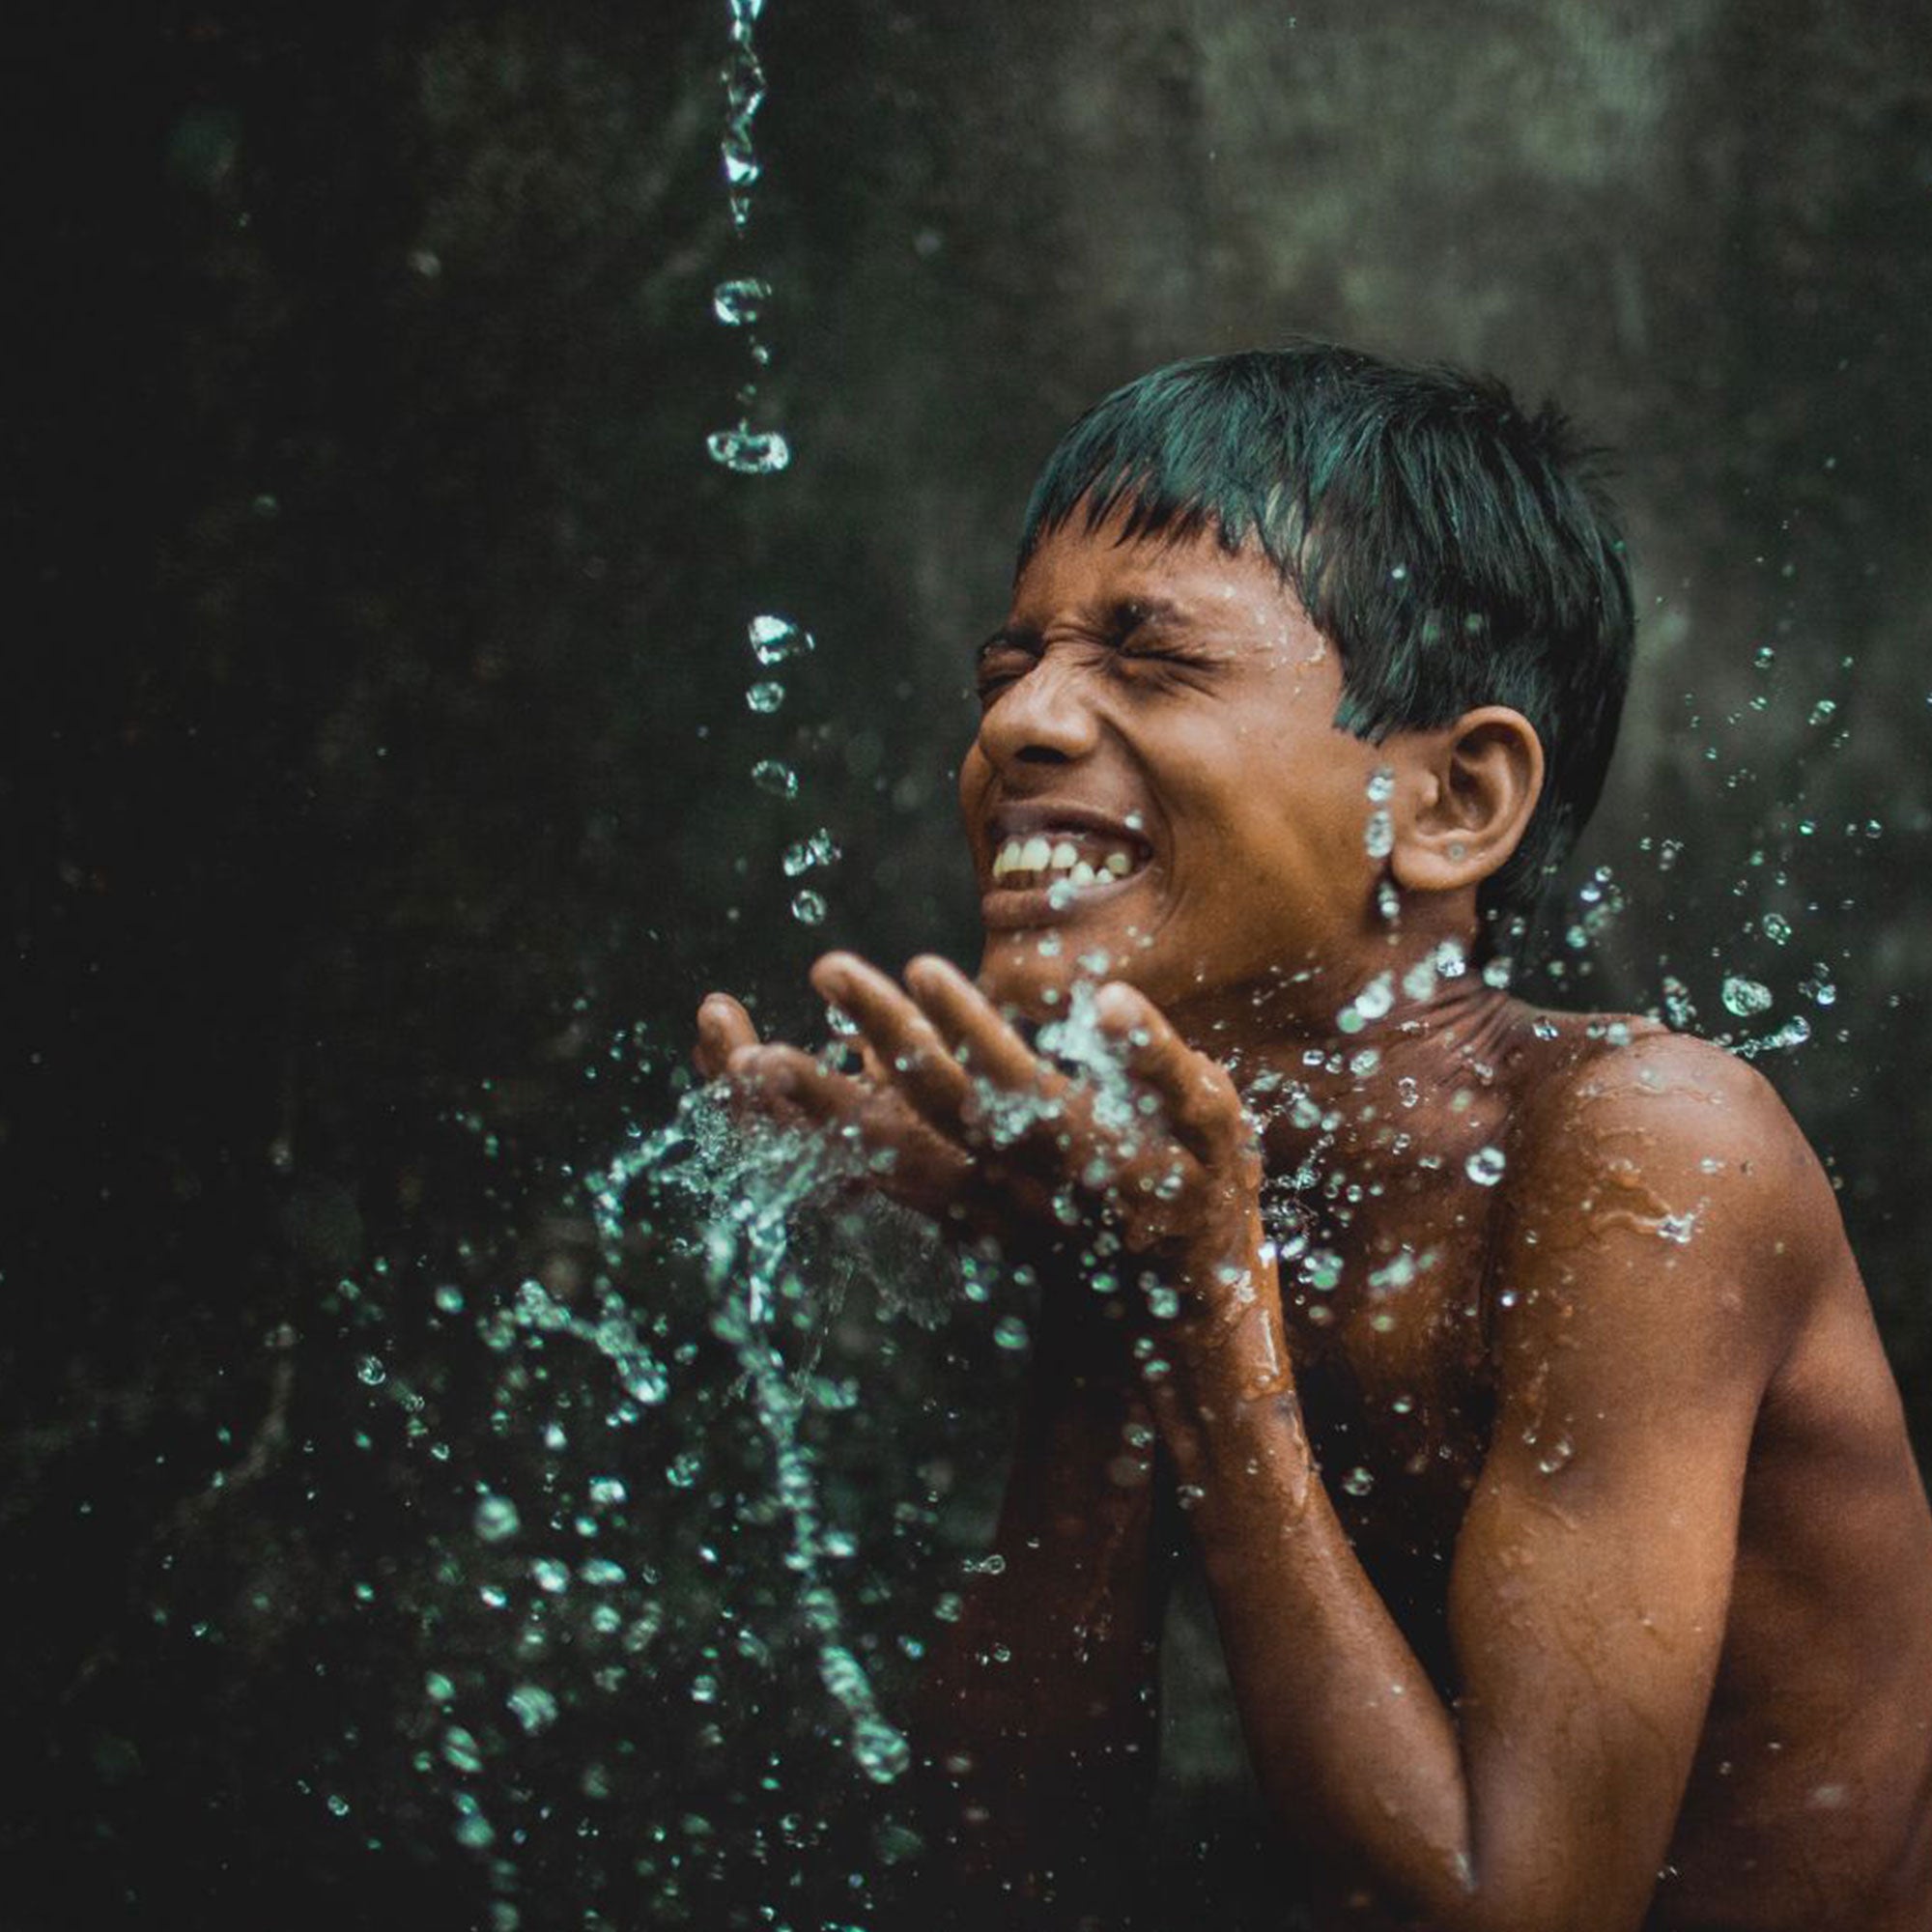 Smiling young child against dark background with water pouring above and splashing onto his face